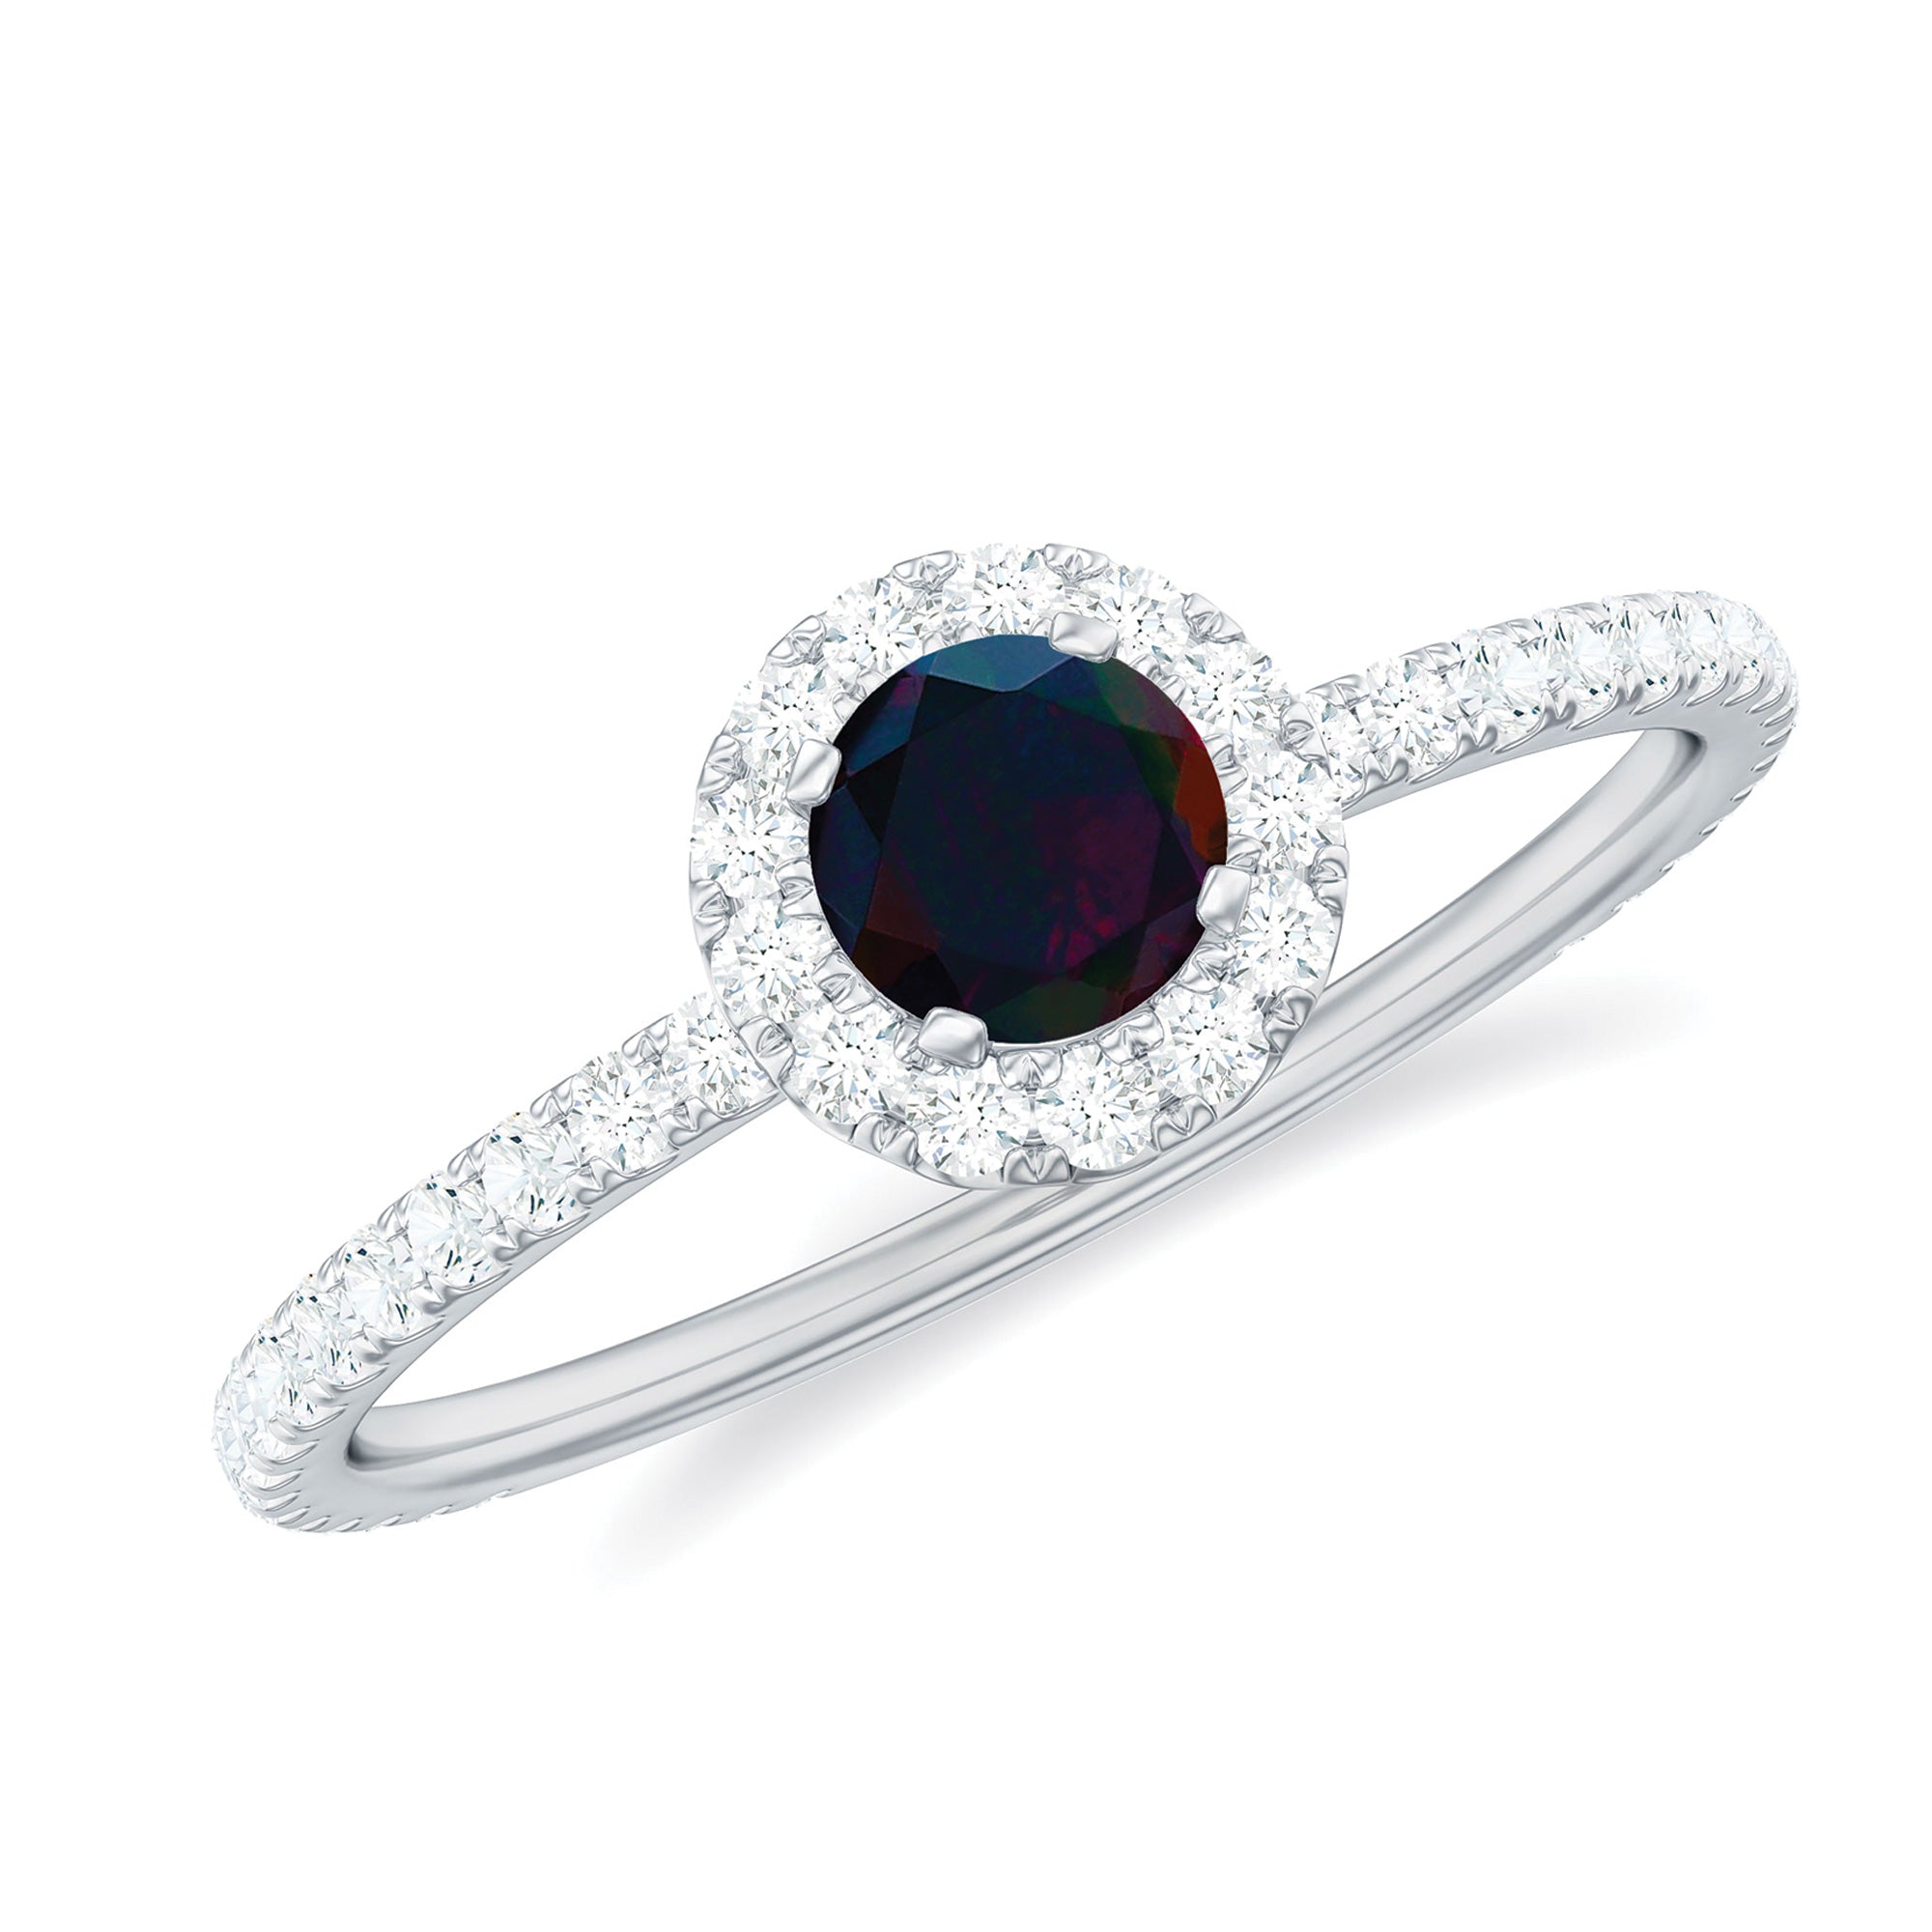 3/4 CT Minimal Black Opal Engagement Ring with Diamond Halo Black Opal - ( AAA ) - Quality - Rosec Jewels